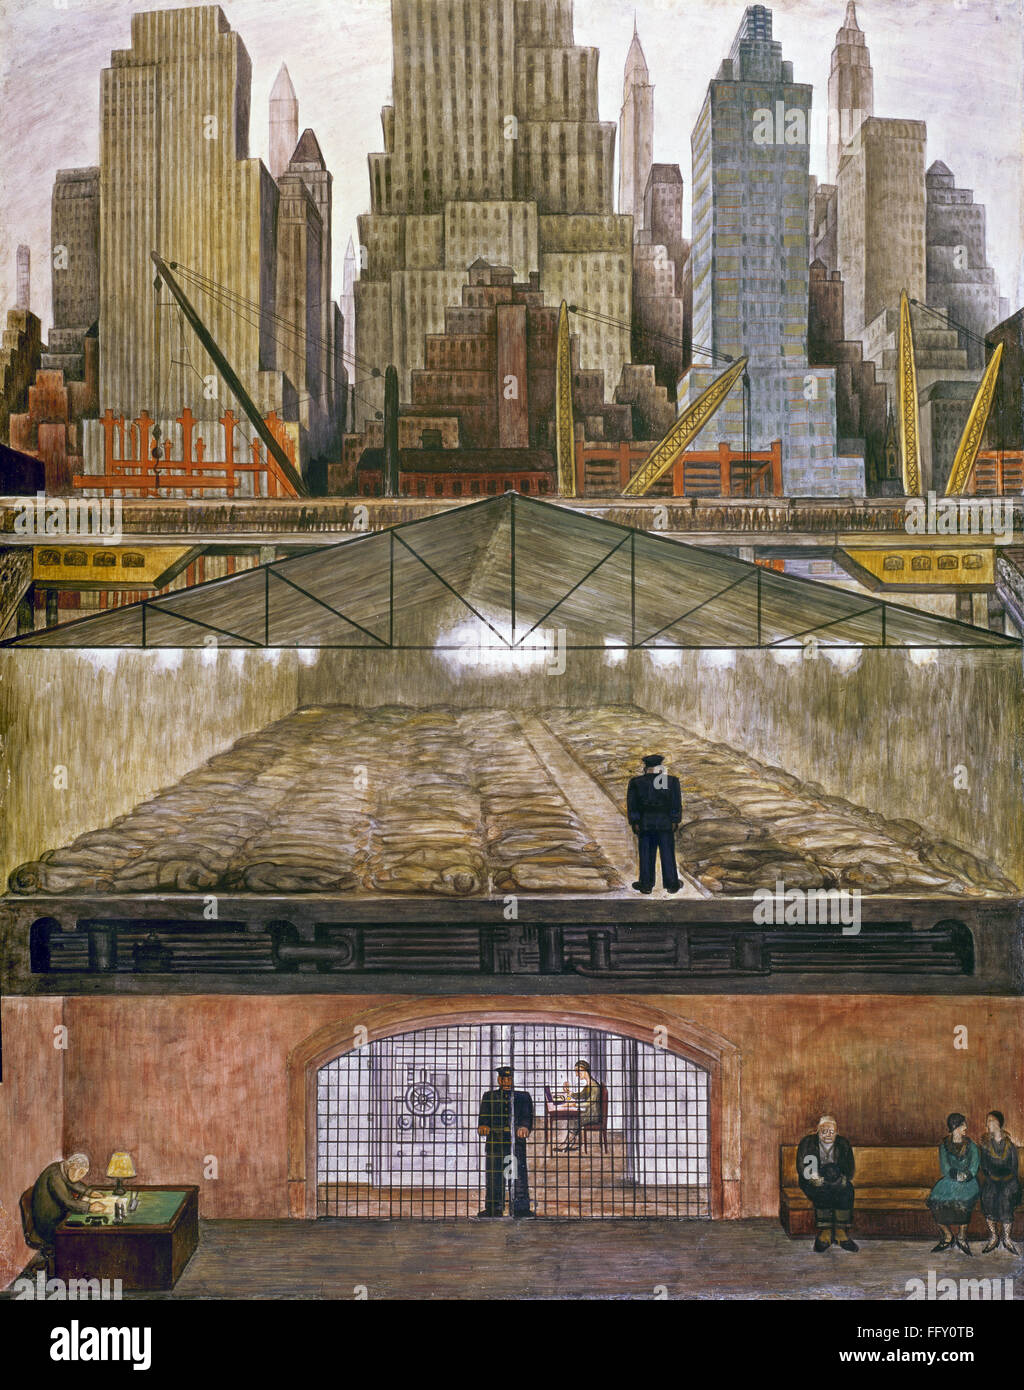 RIVERA: FROZEN ASSETS, 1931. /nMural painting by Diego Rivera, 1931, depicting the Manhattan skyline, commuters in the subways, a homeless shelter and a safety deposit vault. EDITORIAL USE ONLY. Stock Photo